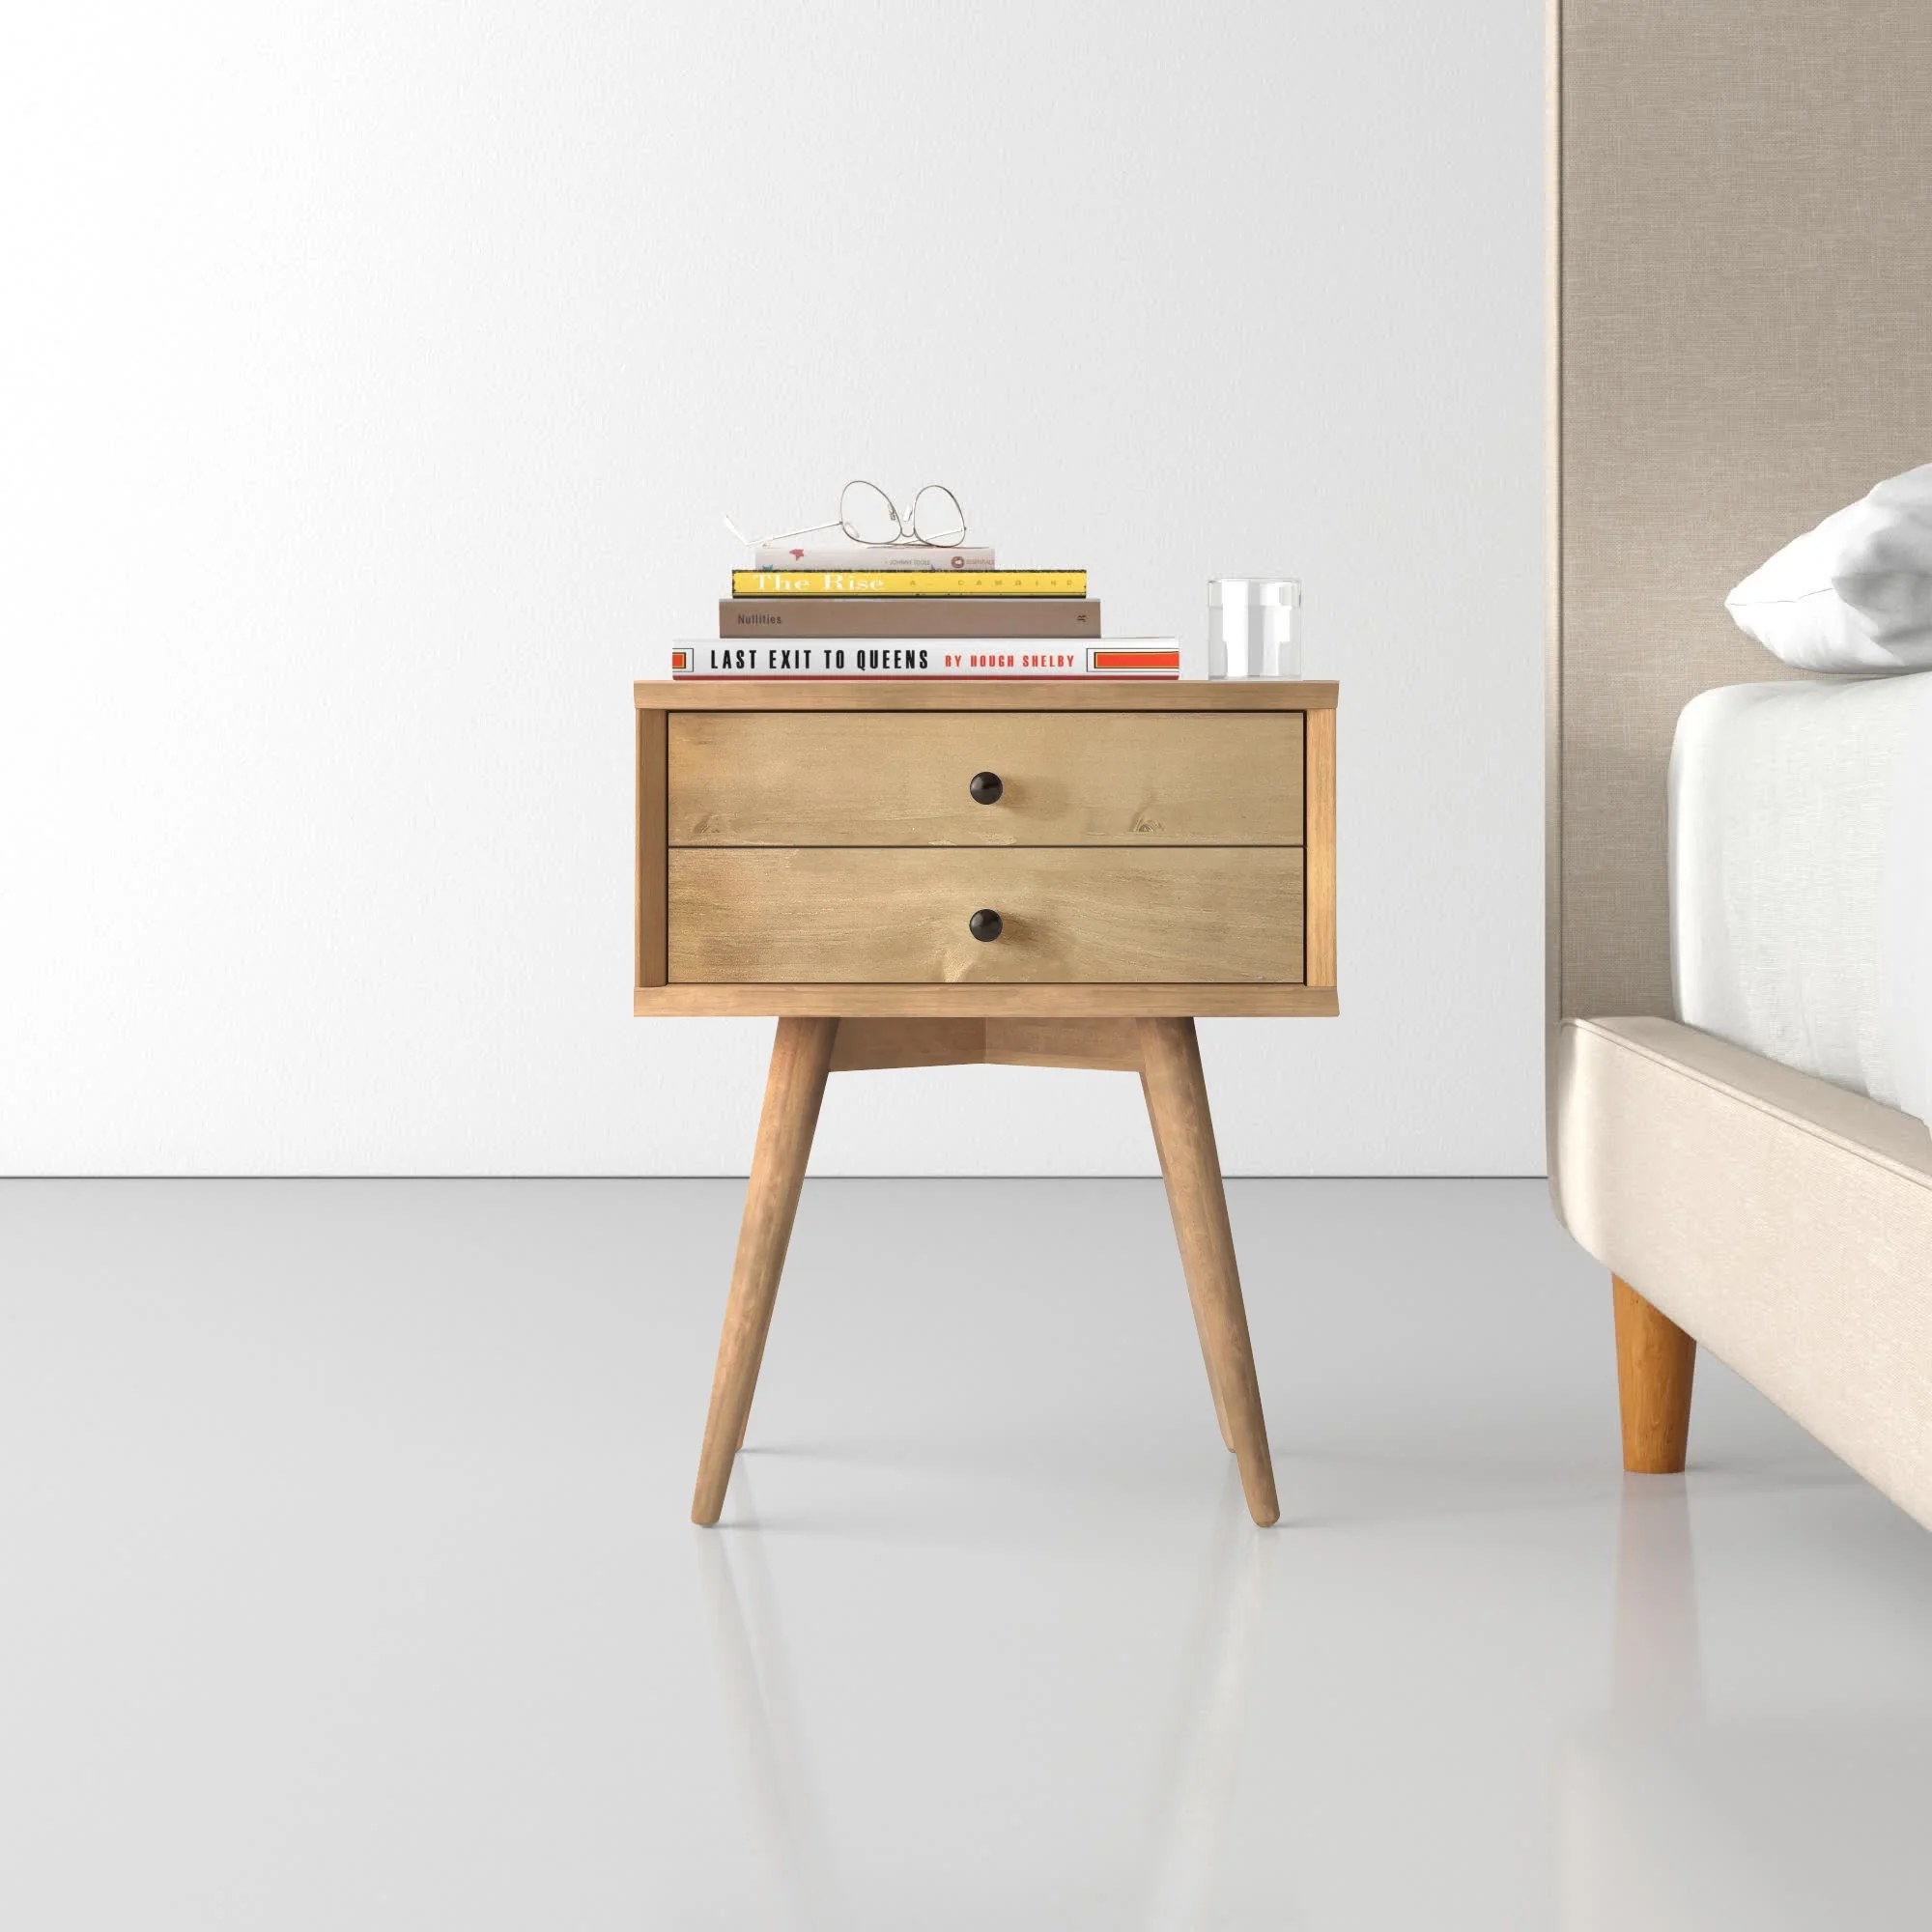 The nightstand with two drawers and splayed legs